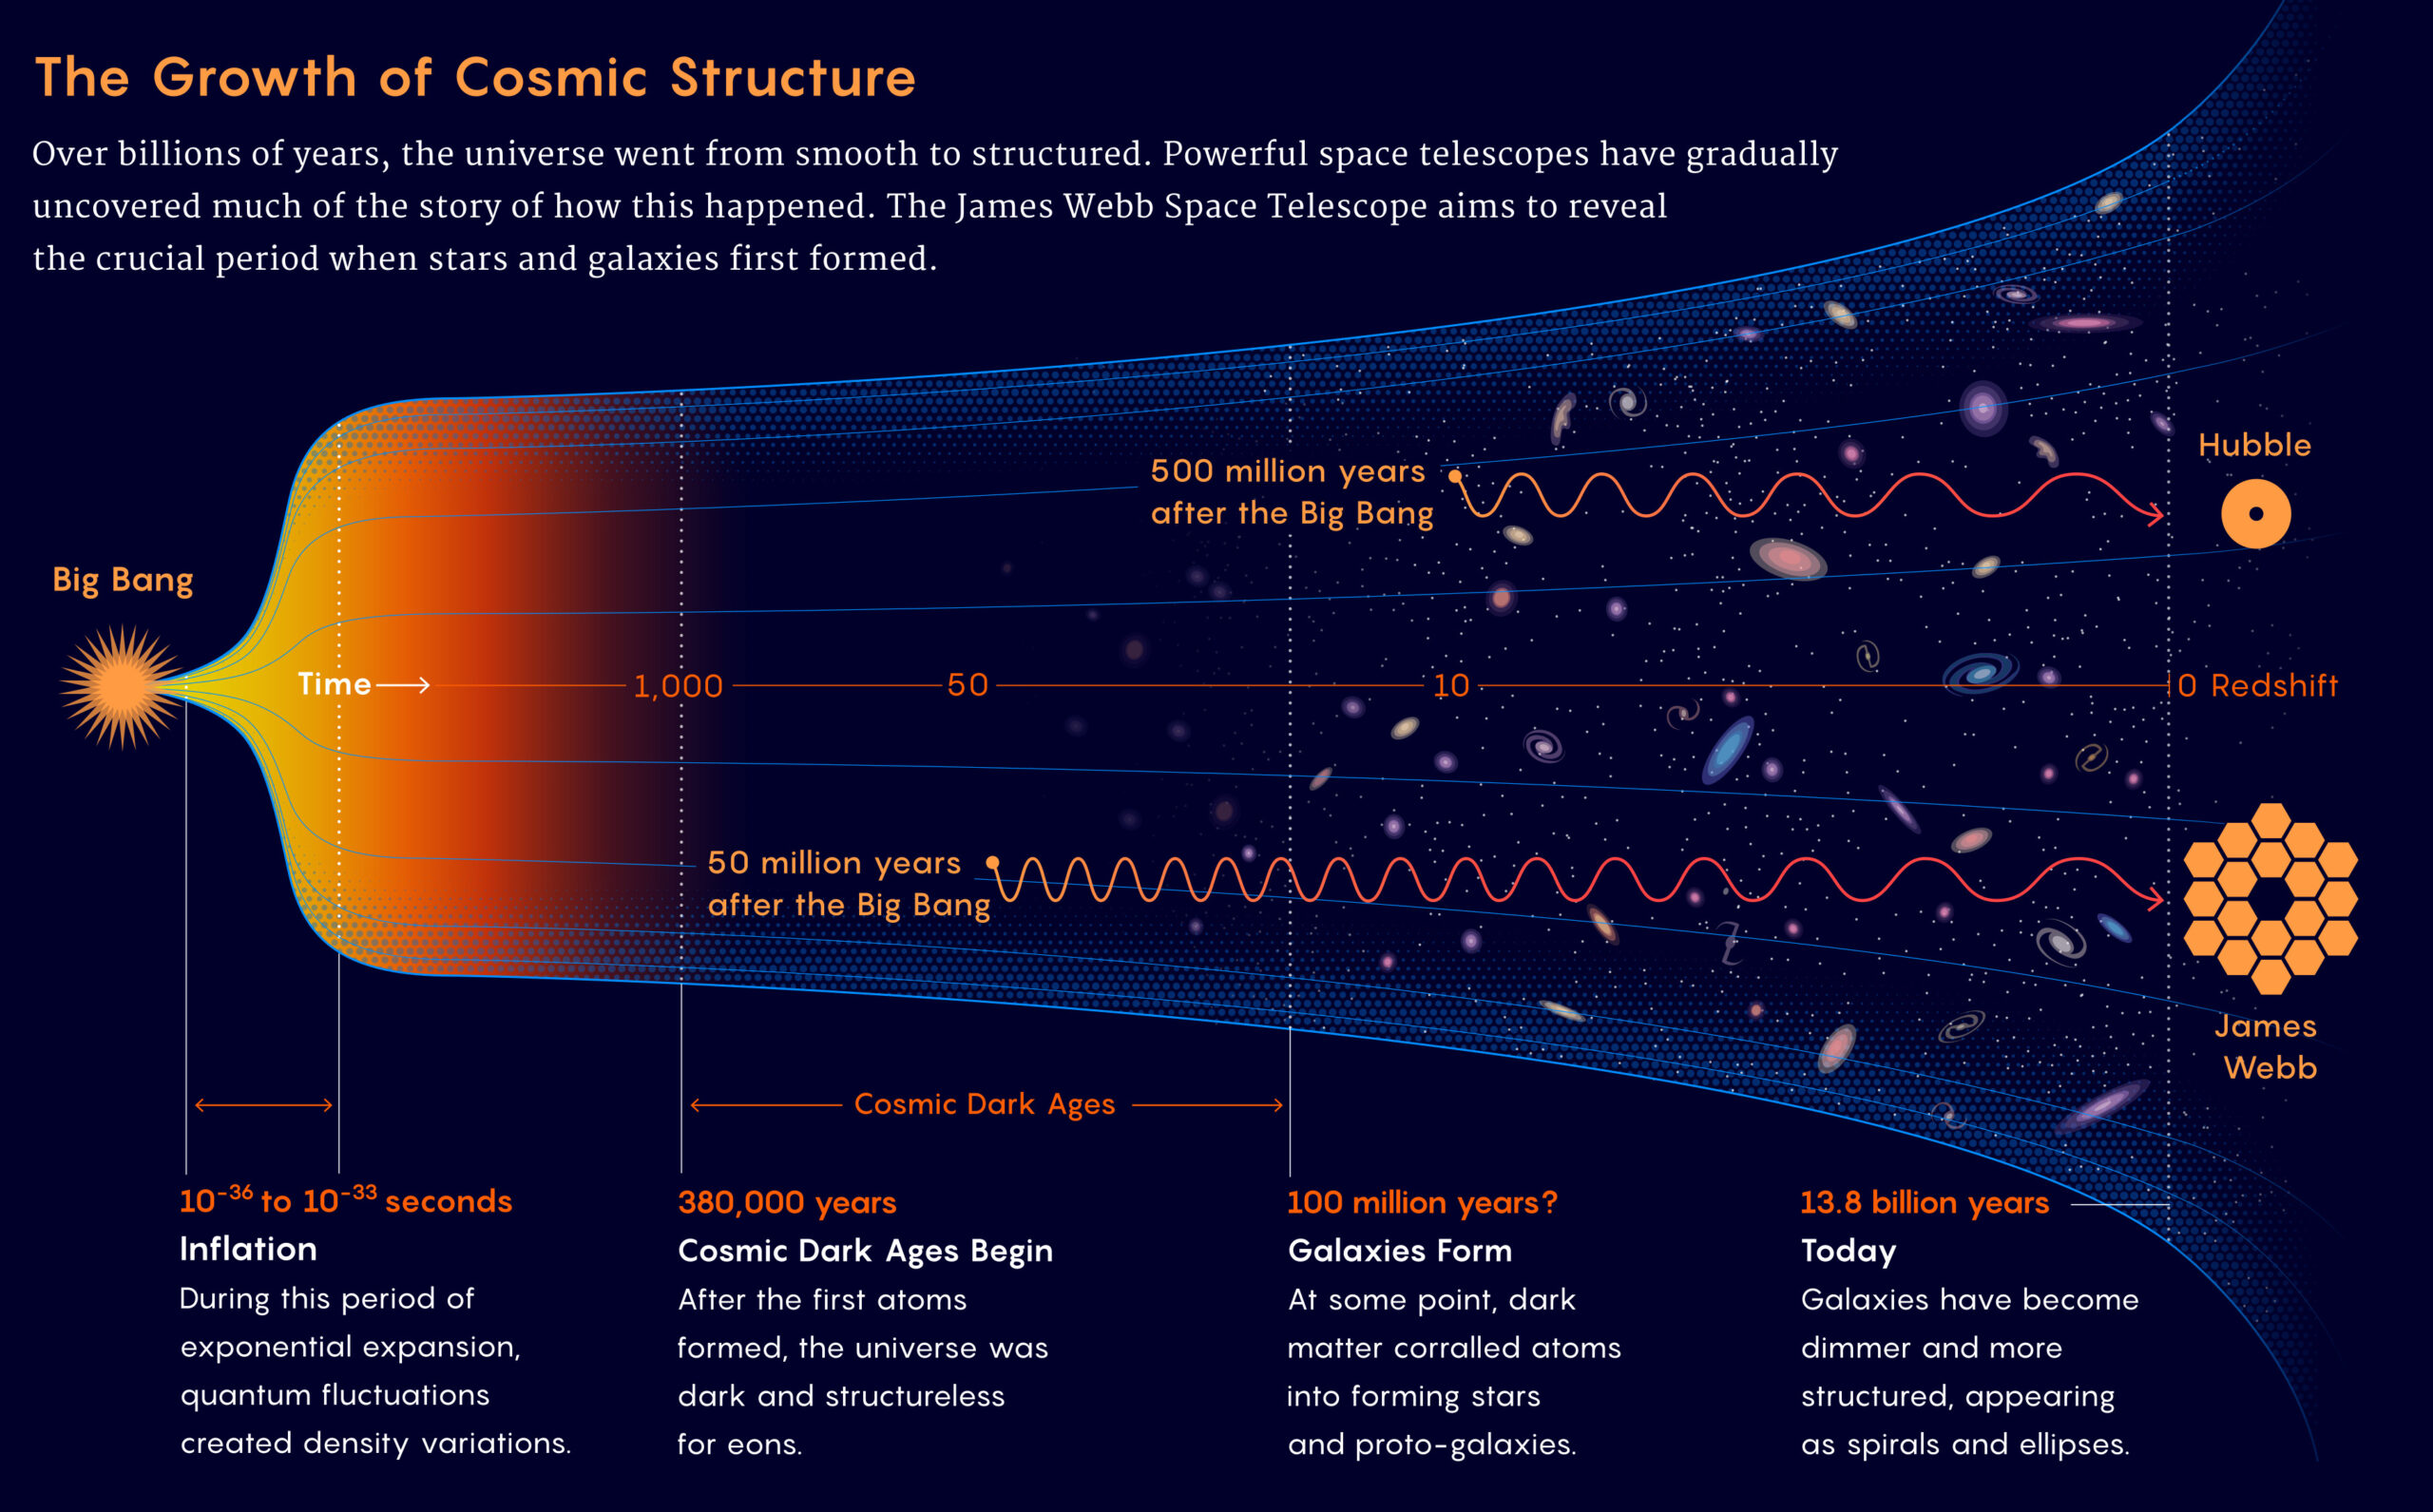 This graphic shows the growth of cosmic structure. Over billions of years, the universe went from smooth to structured. Powerful space telescopes have gradually uncovered much of the story of how this happened. The James Webb Space Telescope aims to reveal the crucial period when stars and galaxies first formed.